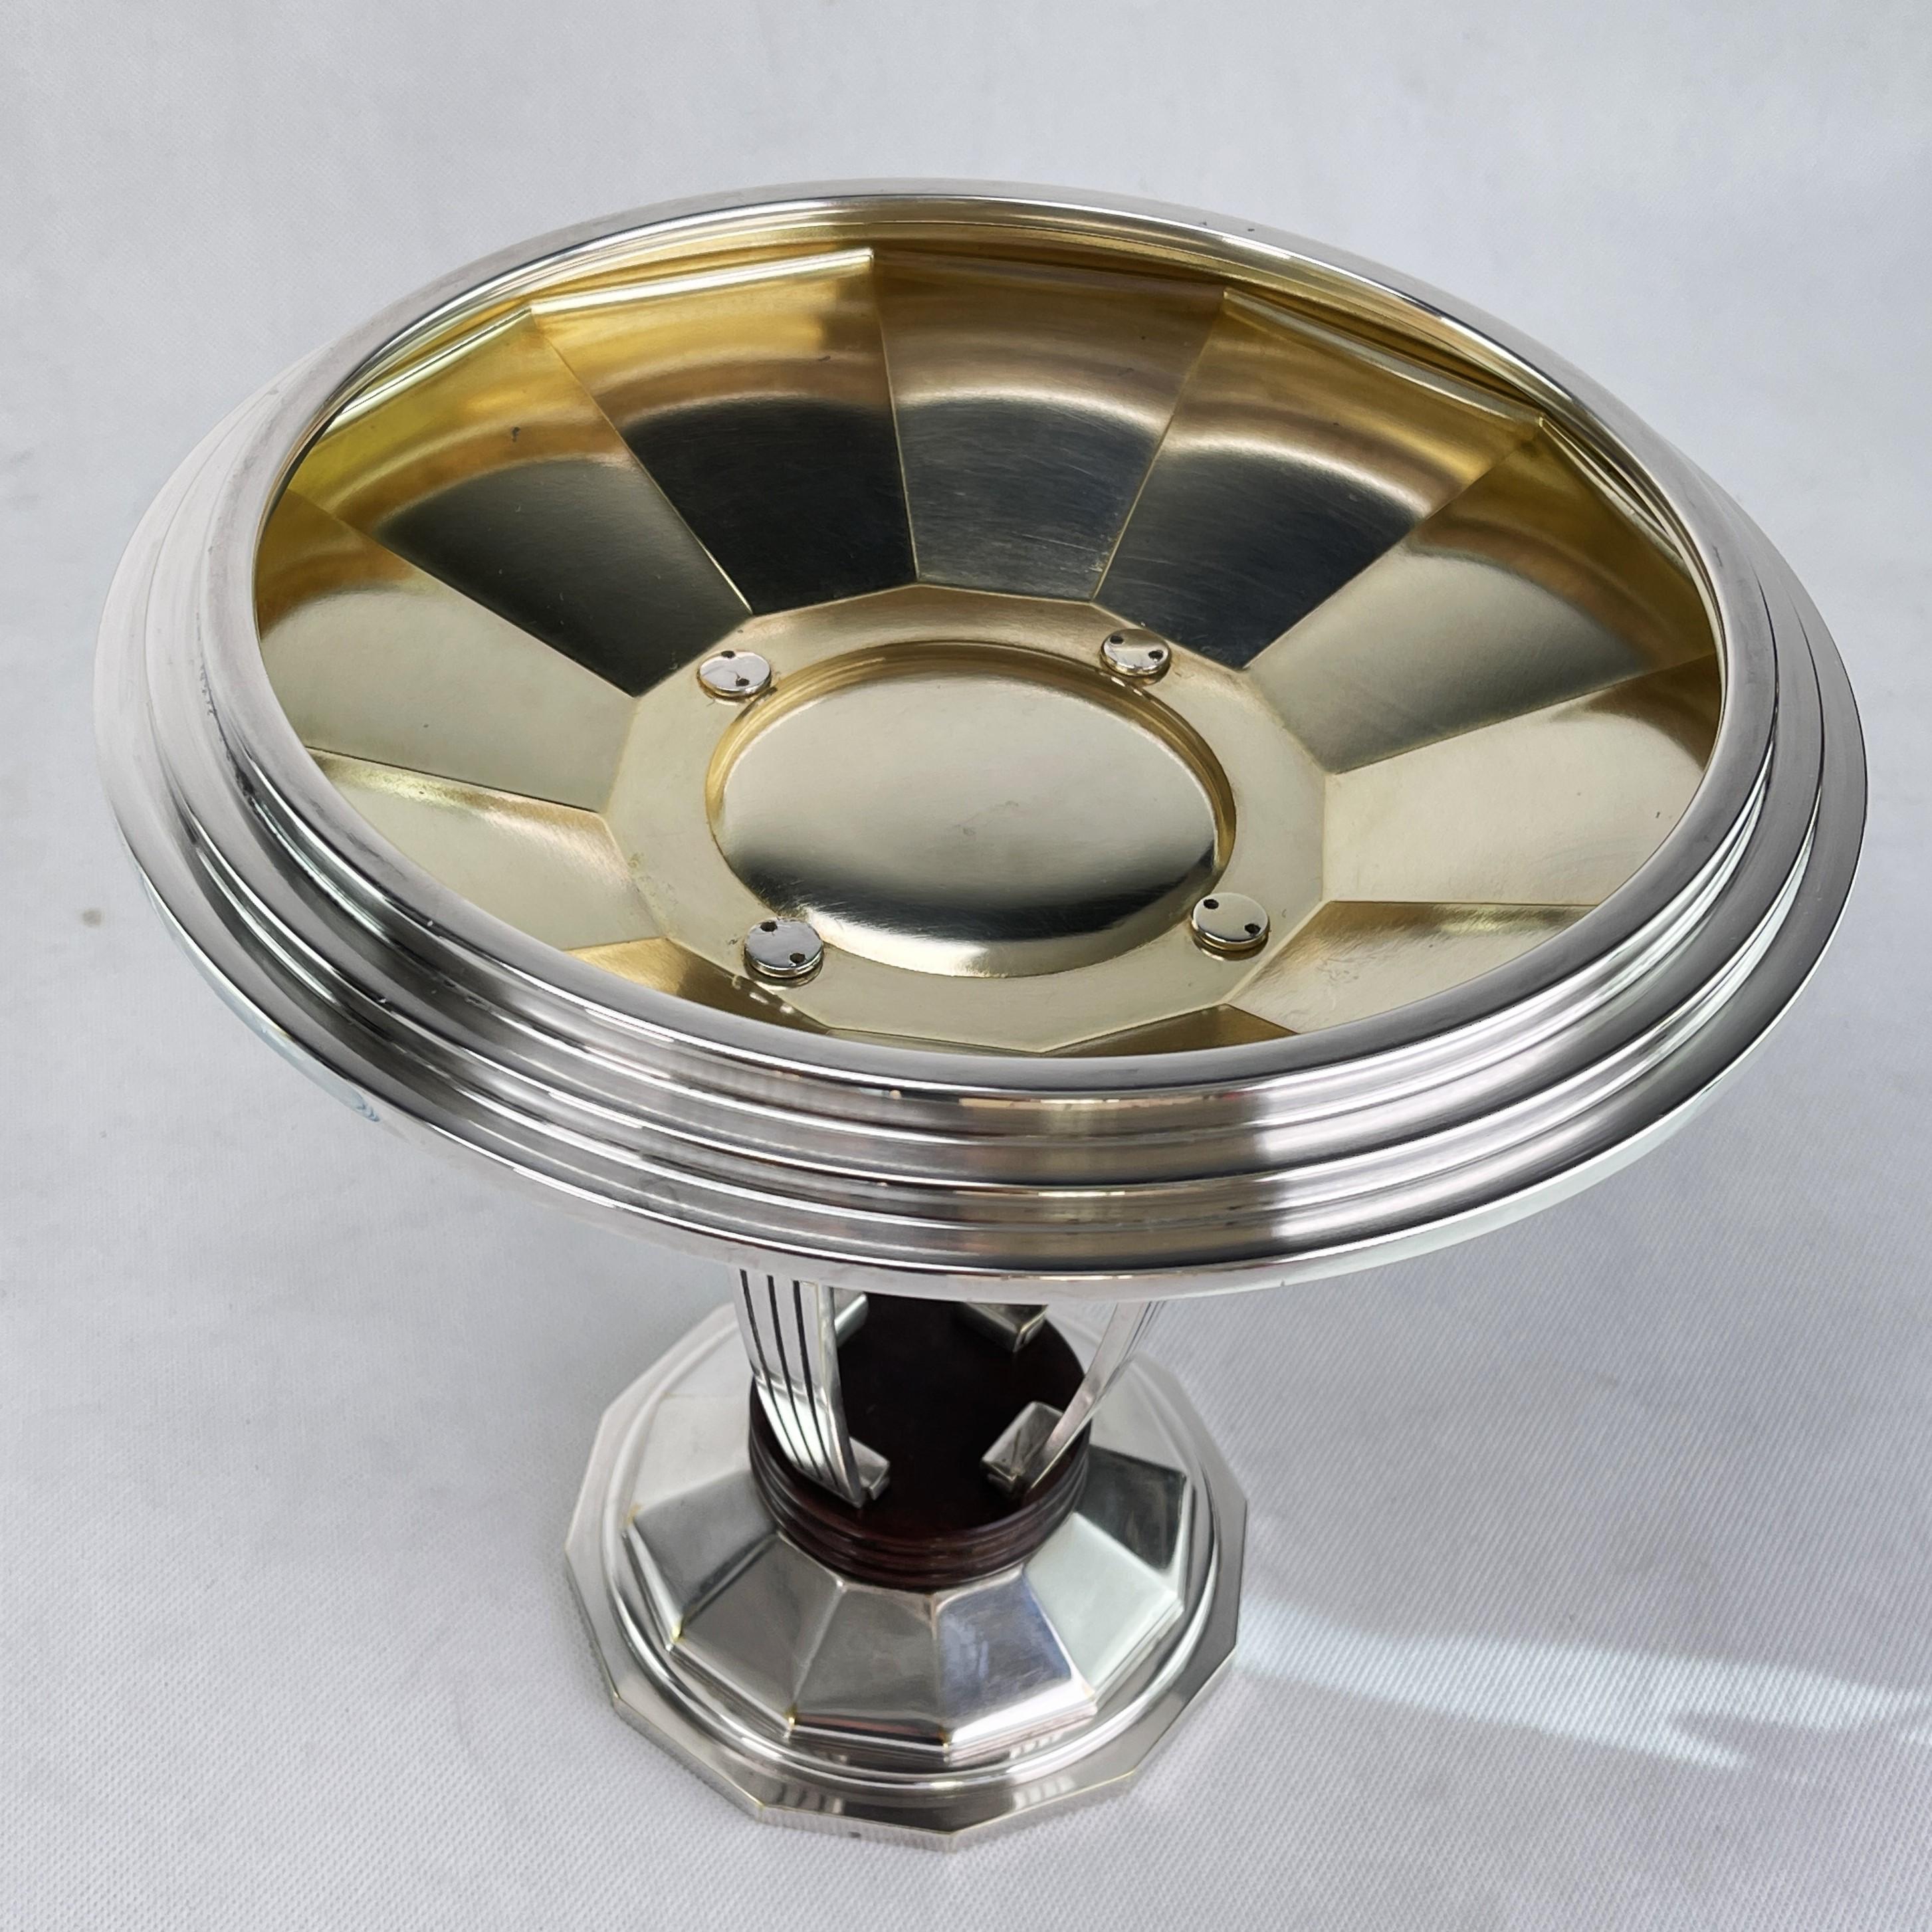 Beautiful ART DECO centrepiece bowl by Durousseau & Raynaud silver plated 1930s For Sale 1